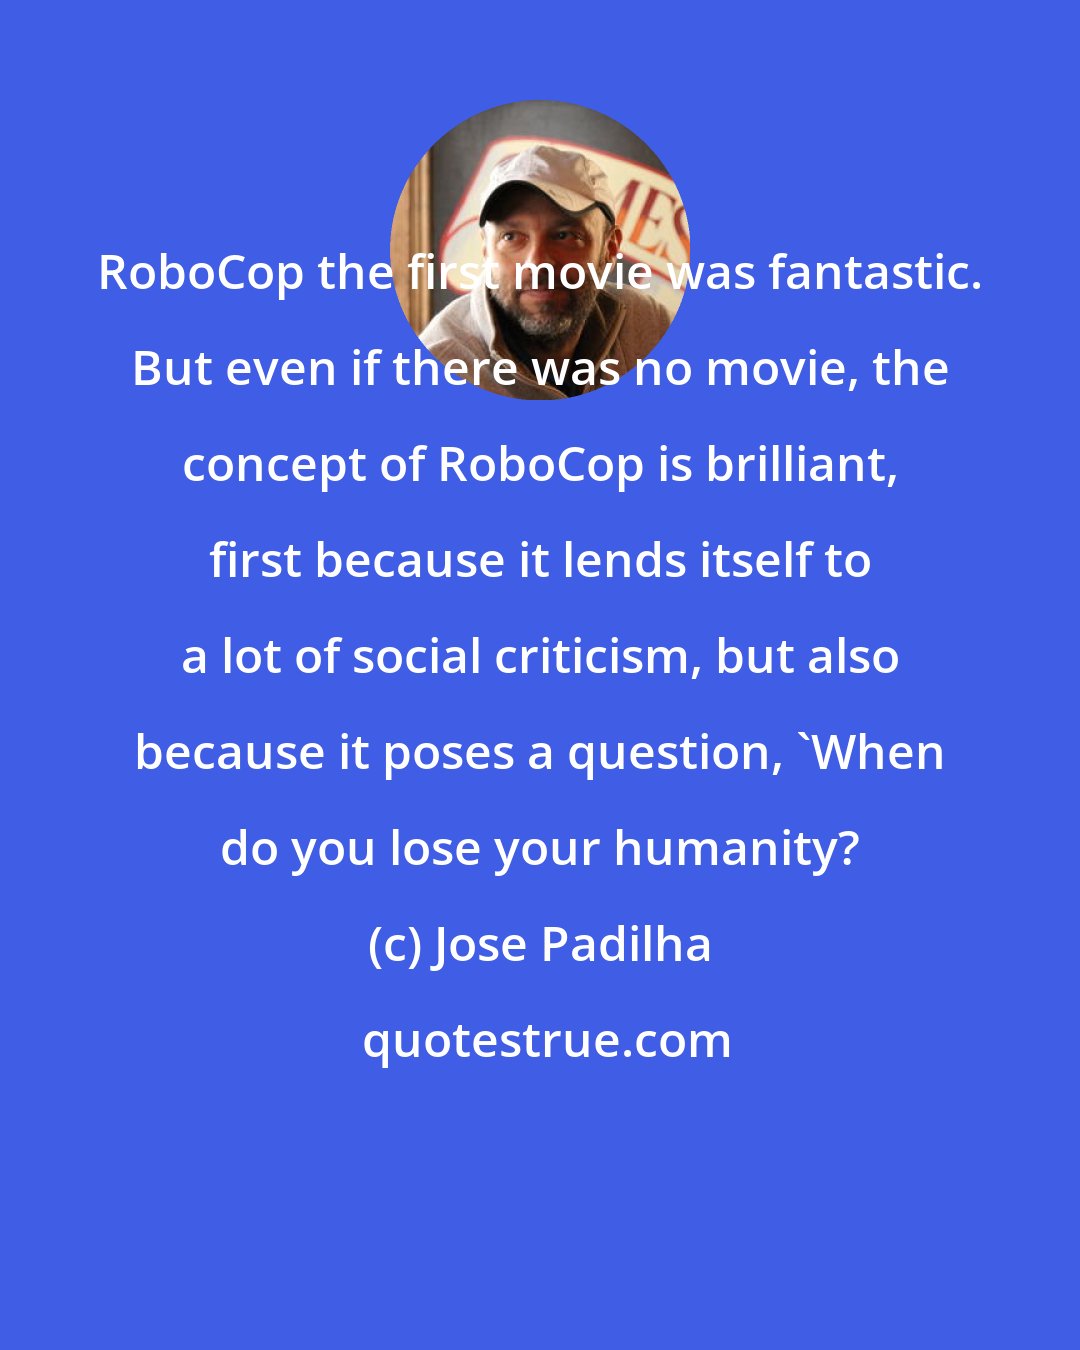 Jose Padilha: RoboCop the first movie was fantastic. But even if there was no movie, the concept of RoboCop is brilliant, first because it lends itself to a lot of social criticism, but also because it poses a question, 'When do you lose your humanity?